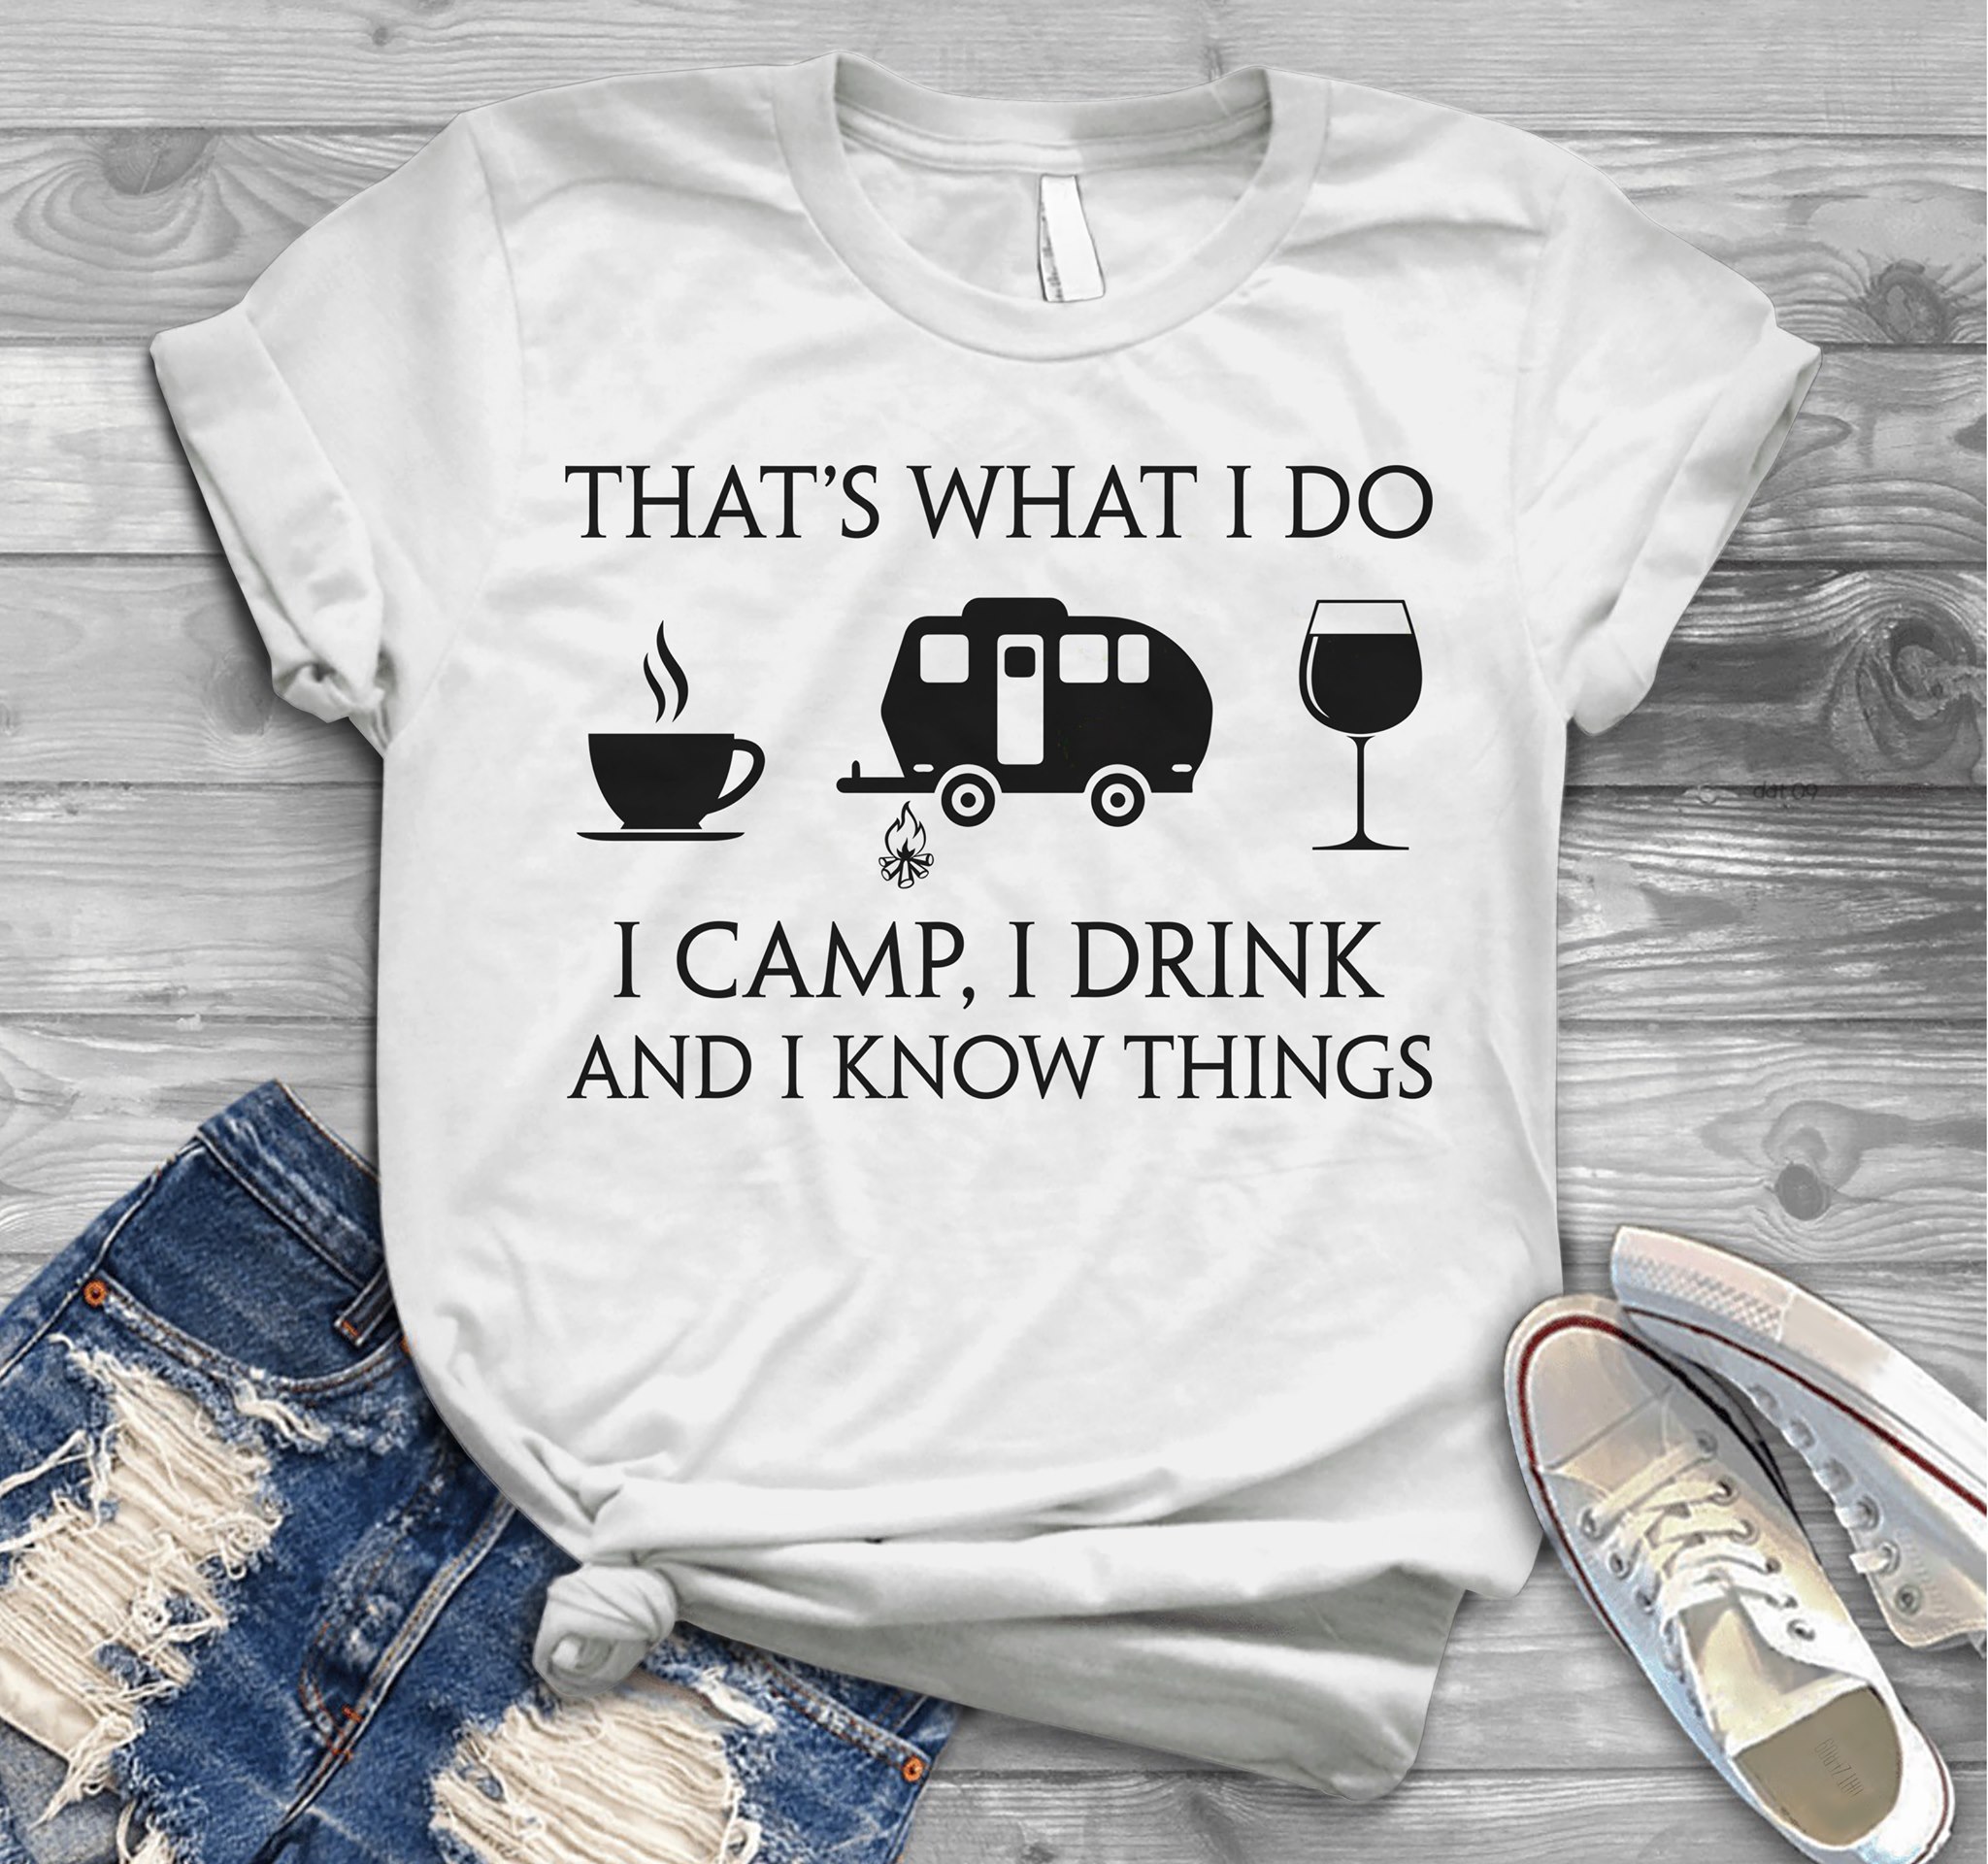 That's what I do - I camp, I drink and I know things